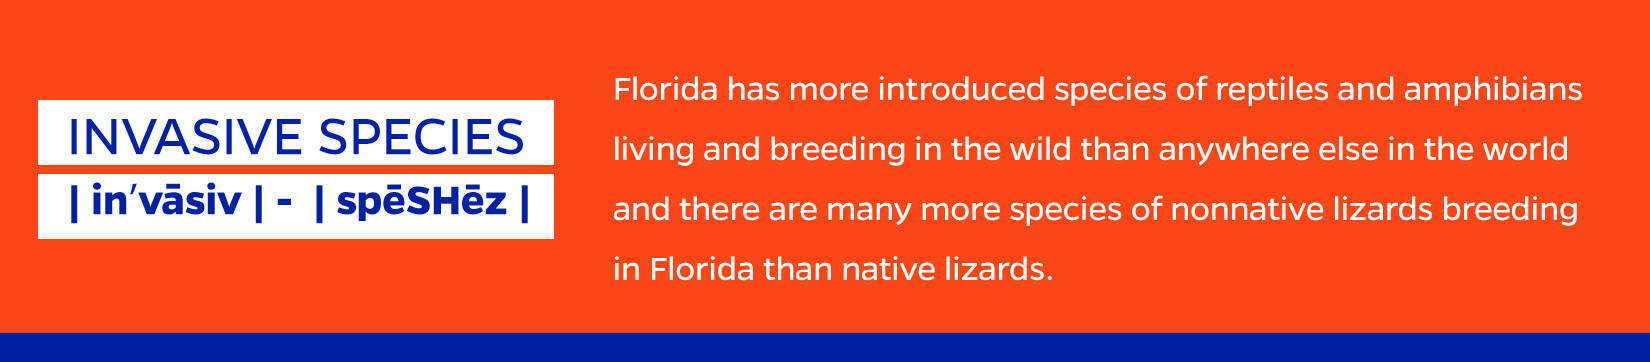 FAST FACTS: Florida has more introduced species of reptiles and amphibians living and breeding in the wild than anywhere else in the world and there are many more species of nonnative lizards breeding in Florida than native lizards.